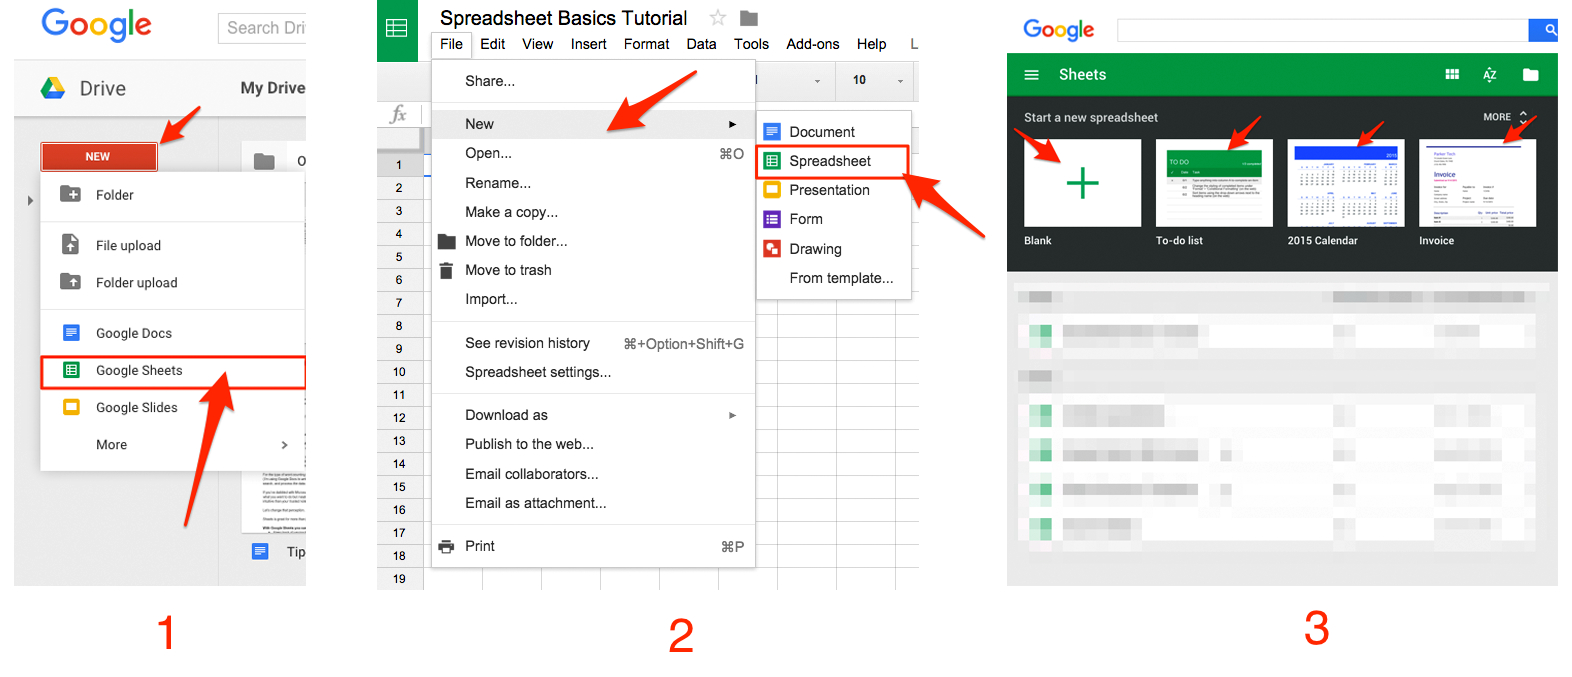 Spreadsheet Tutorial For Google Sheets 101: The Beginner's Guide To Online Spreadsheets  The